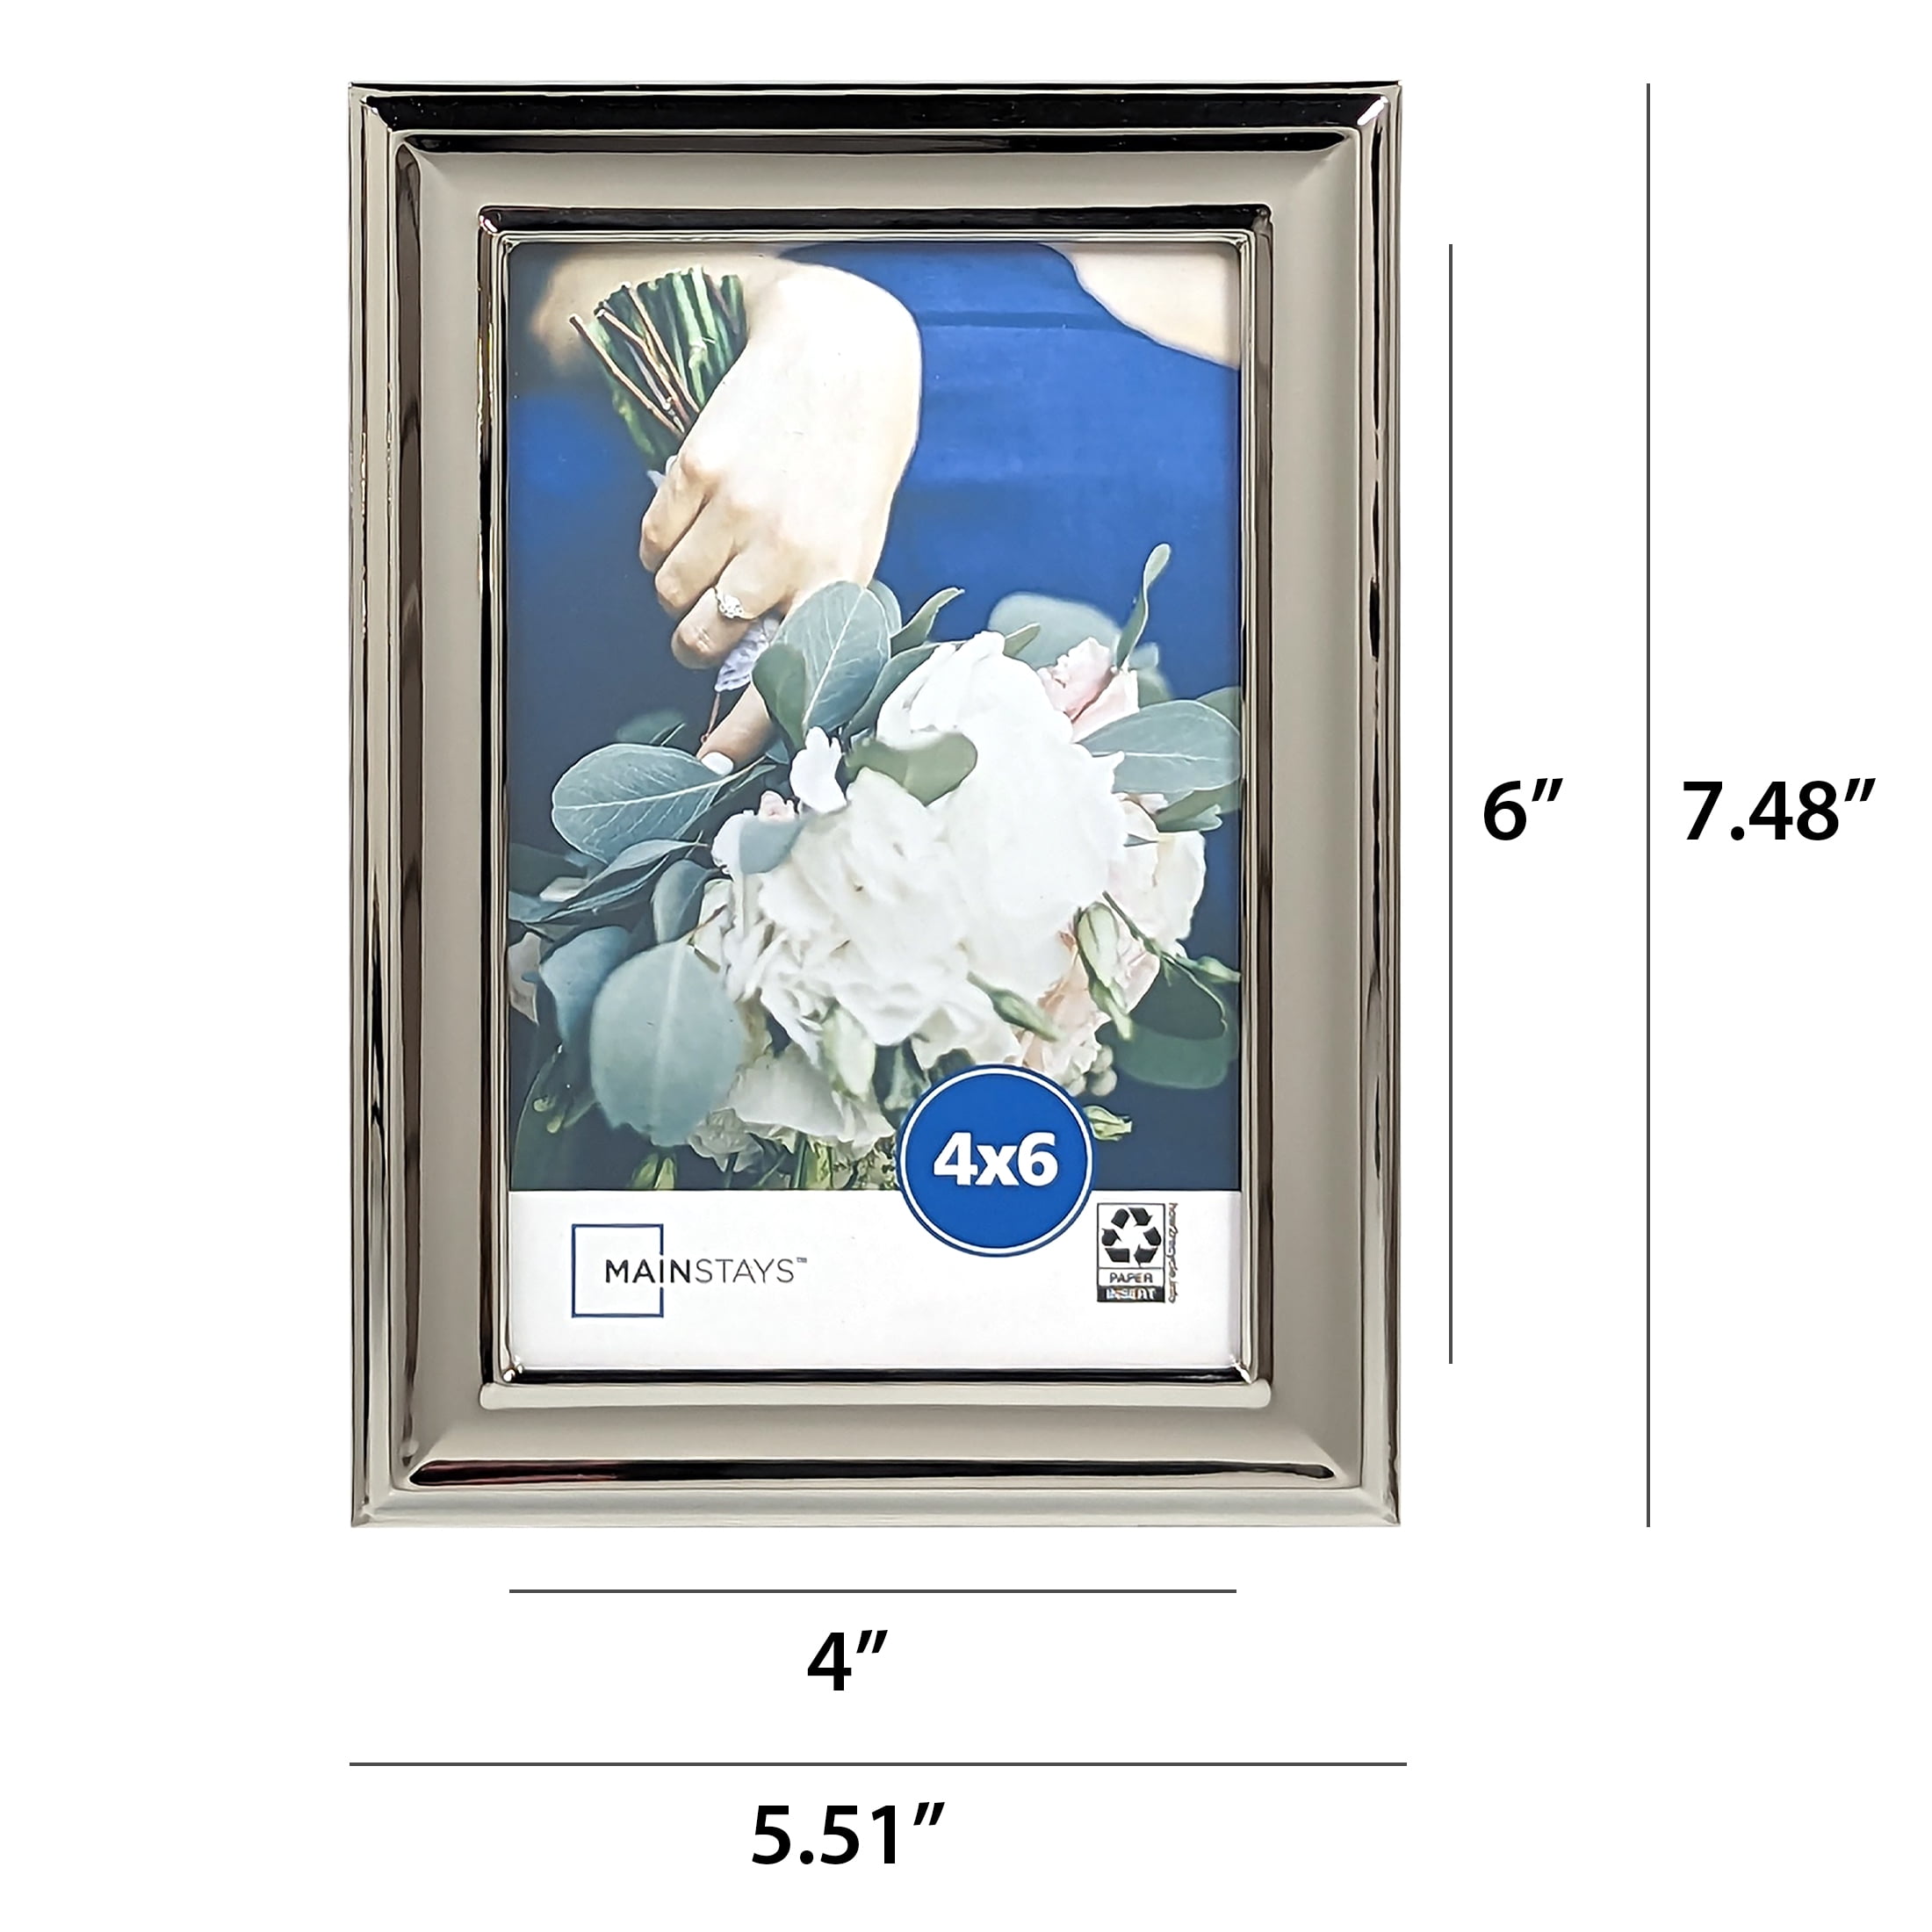 TUSCANY FLORENTINE-SILVER metallic frame matted 8x10 5x7 by Nielsen - 5x7 